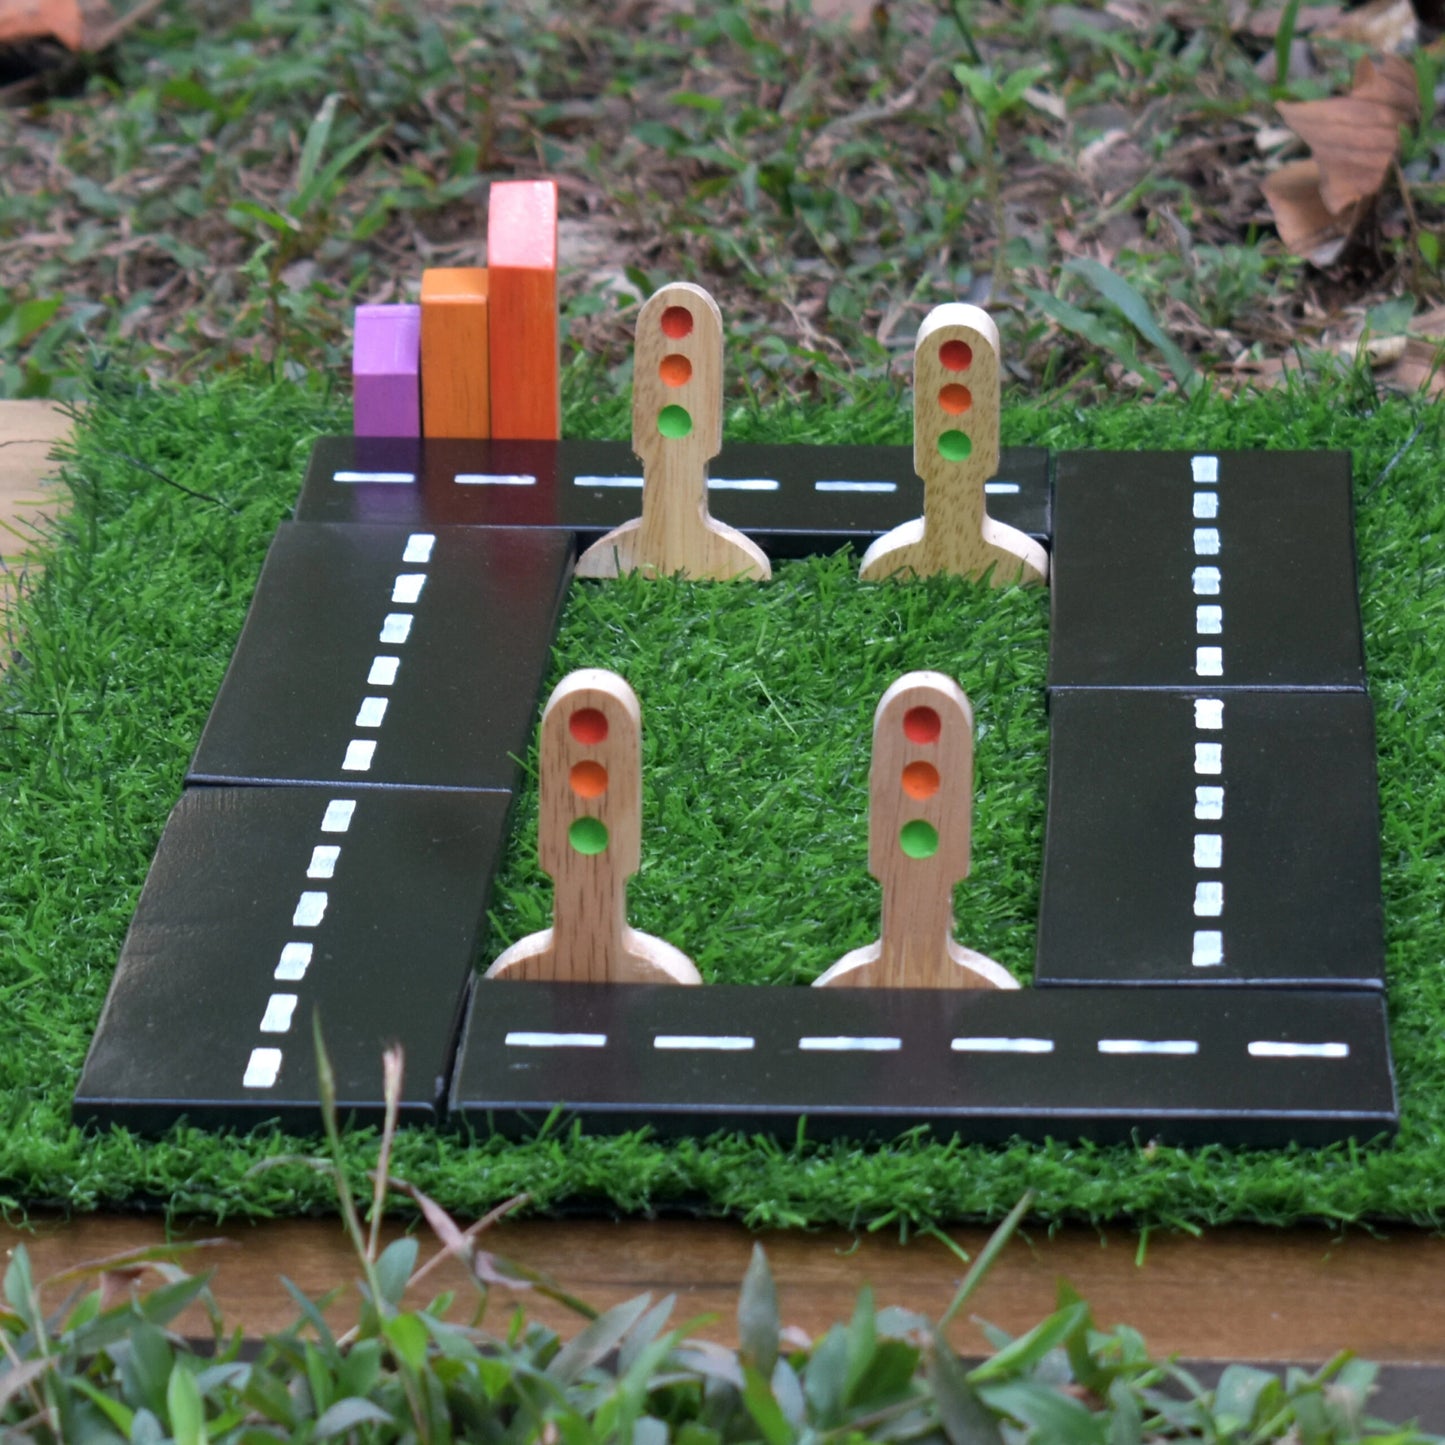 Buy Wooden Traffic Play Toy - SkilloToys.com